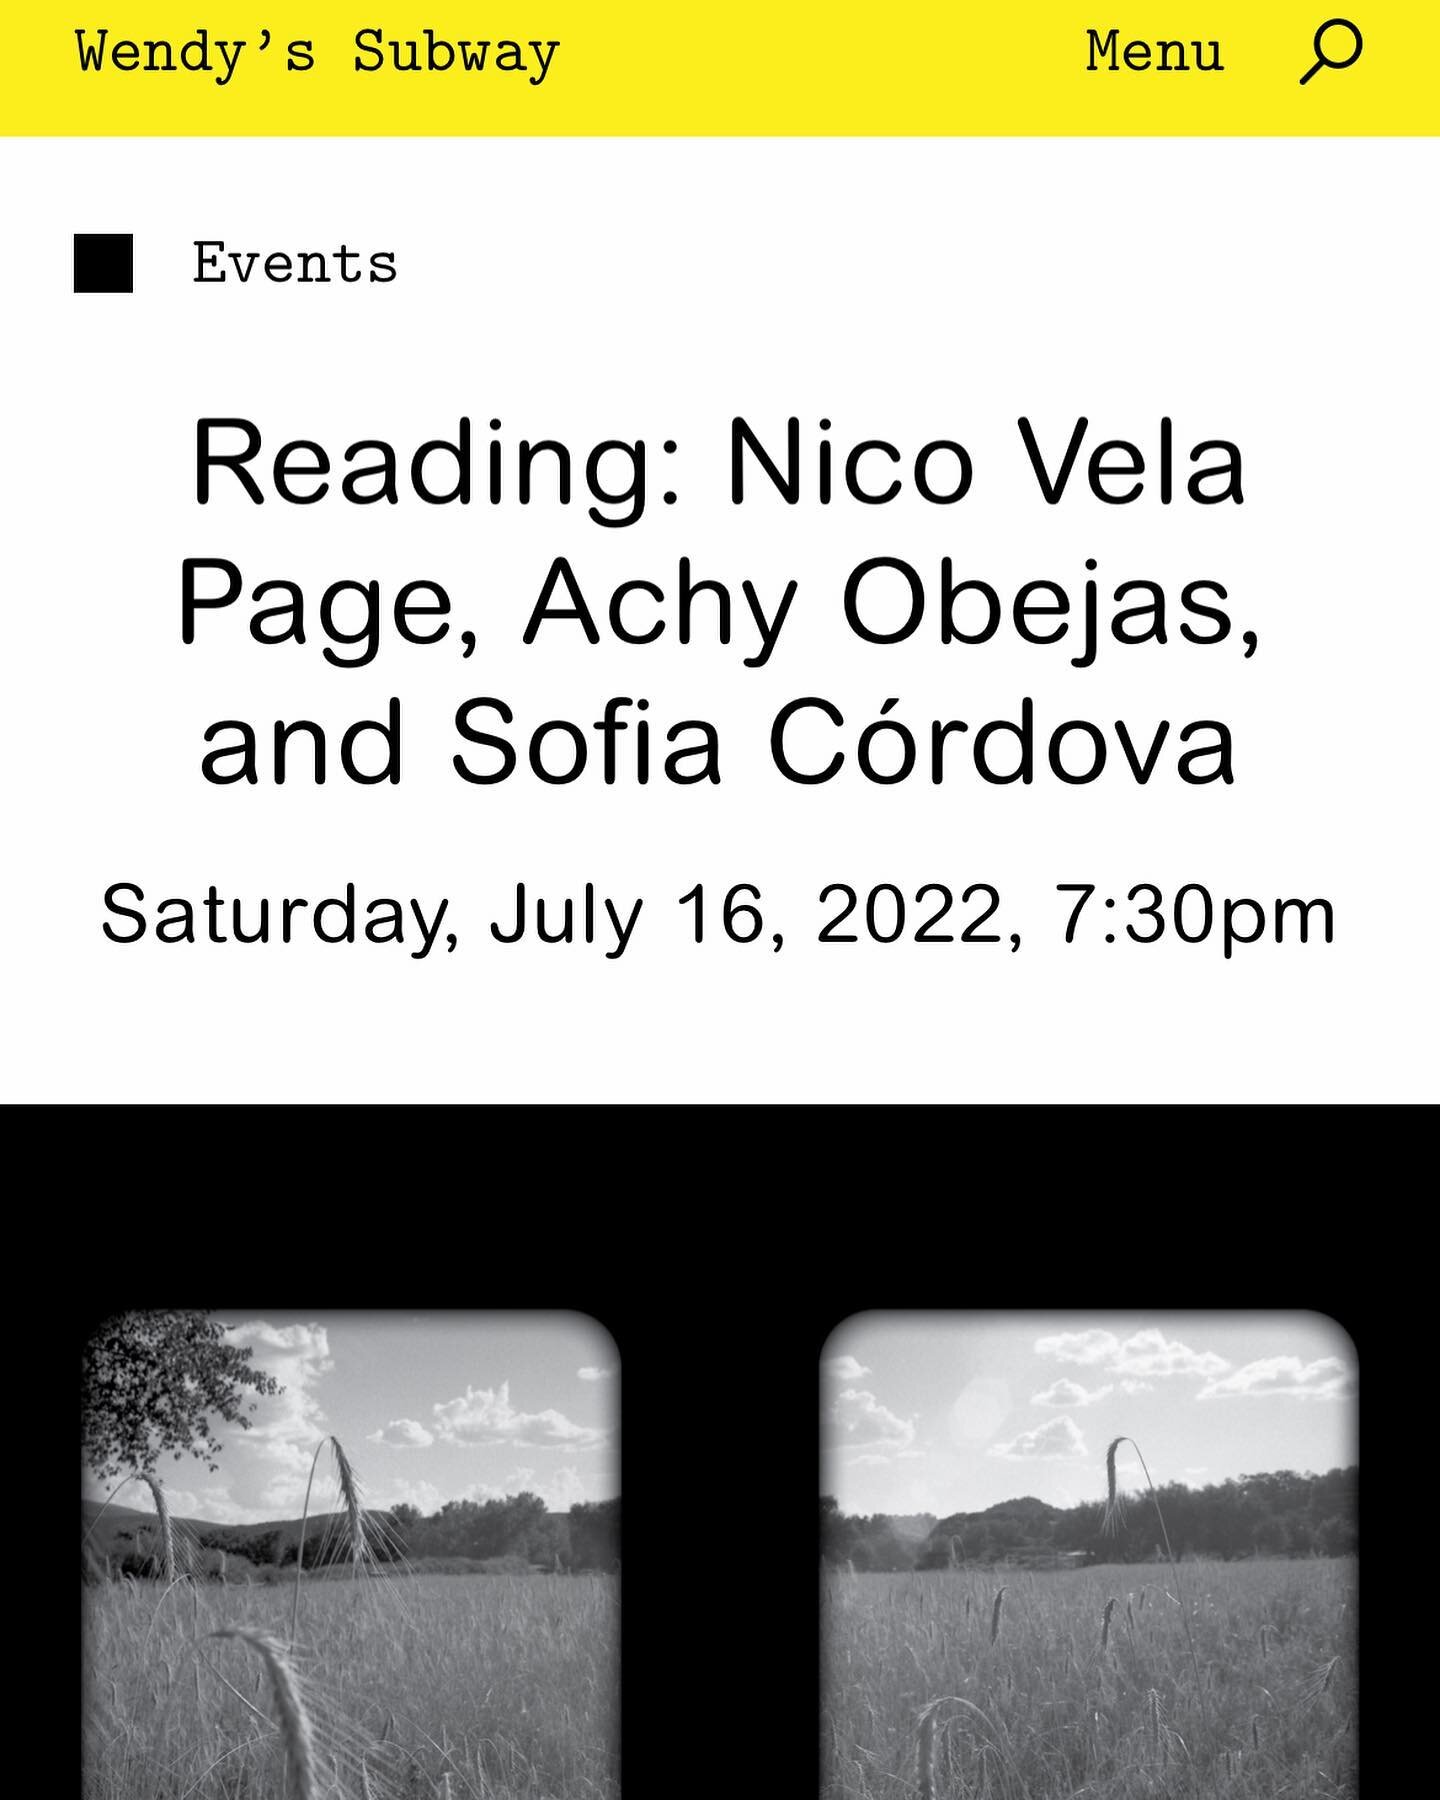 TONIGHT: in advance of Nico Vela Page's forthcoming Americ&oacute;n, out in August @wendyssubway presents:
⁠
Saturday July 16 at 7:30pm PT ⁠
San Francisco at Et al. books. 
⁠
Join us to celebrate with readings and video work by Nico Vela Page @nicove